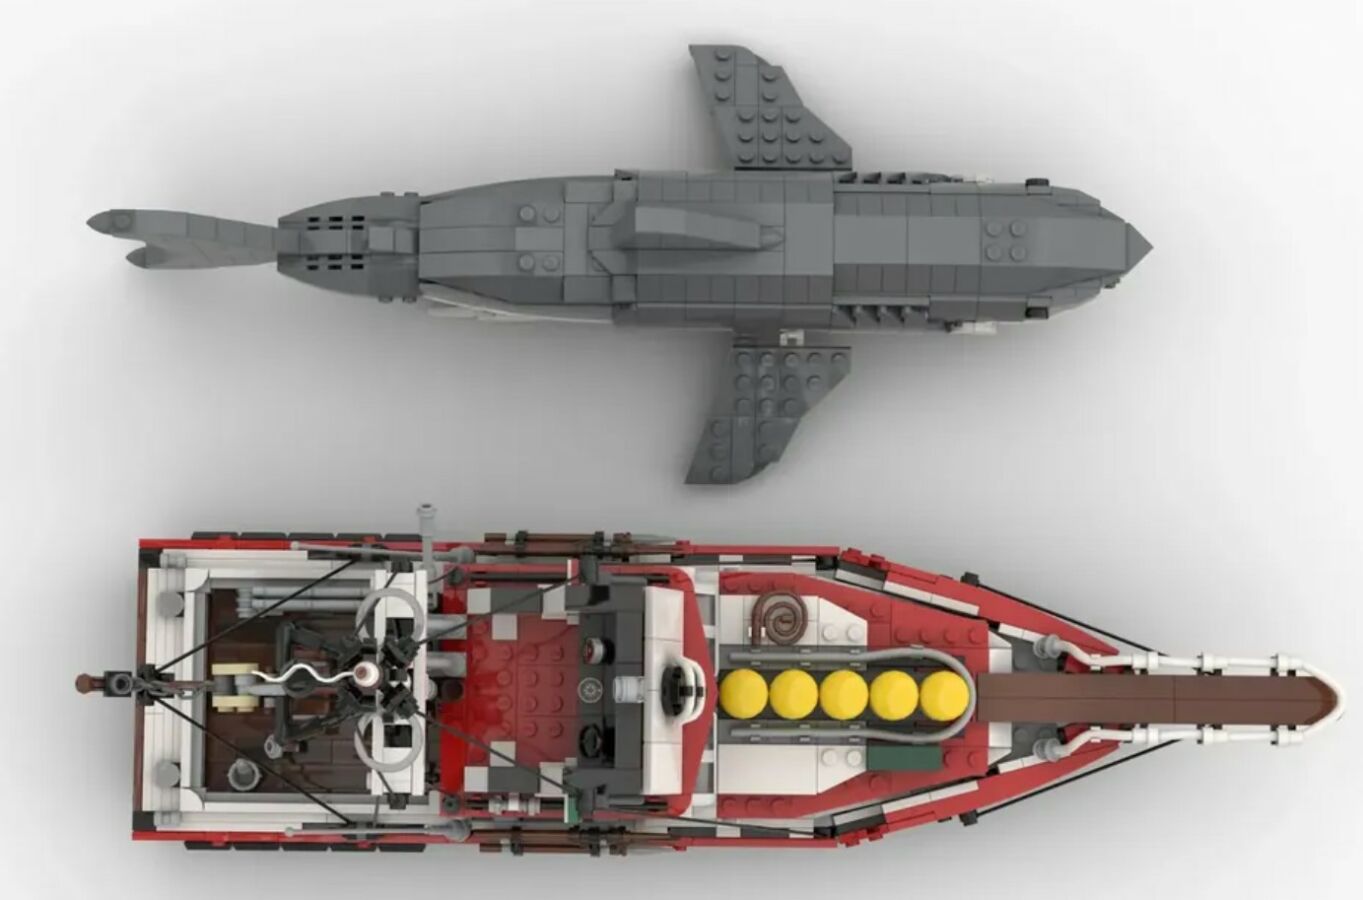 LEGO 'Jaws' Set Surfaces With Fishing Boat And Iconic Giant Shark